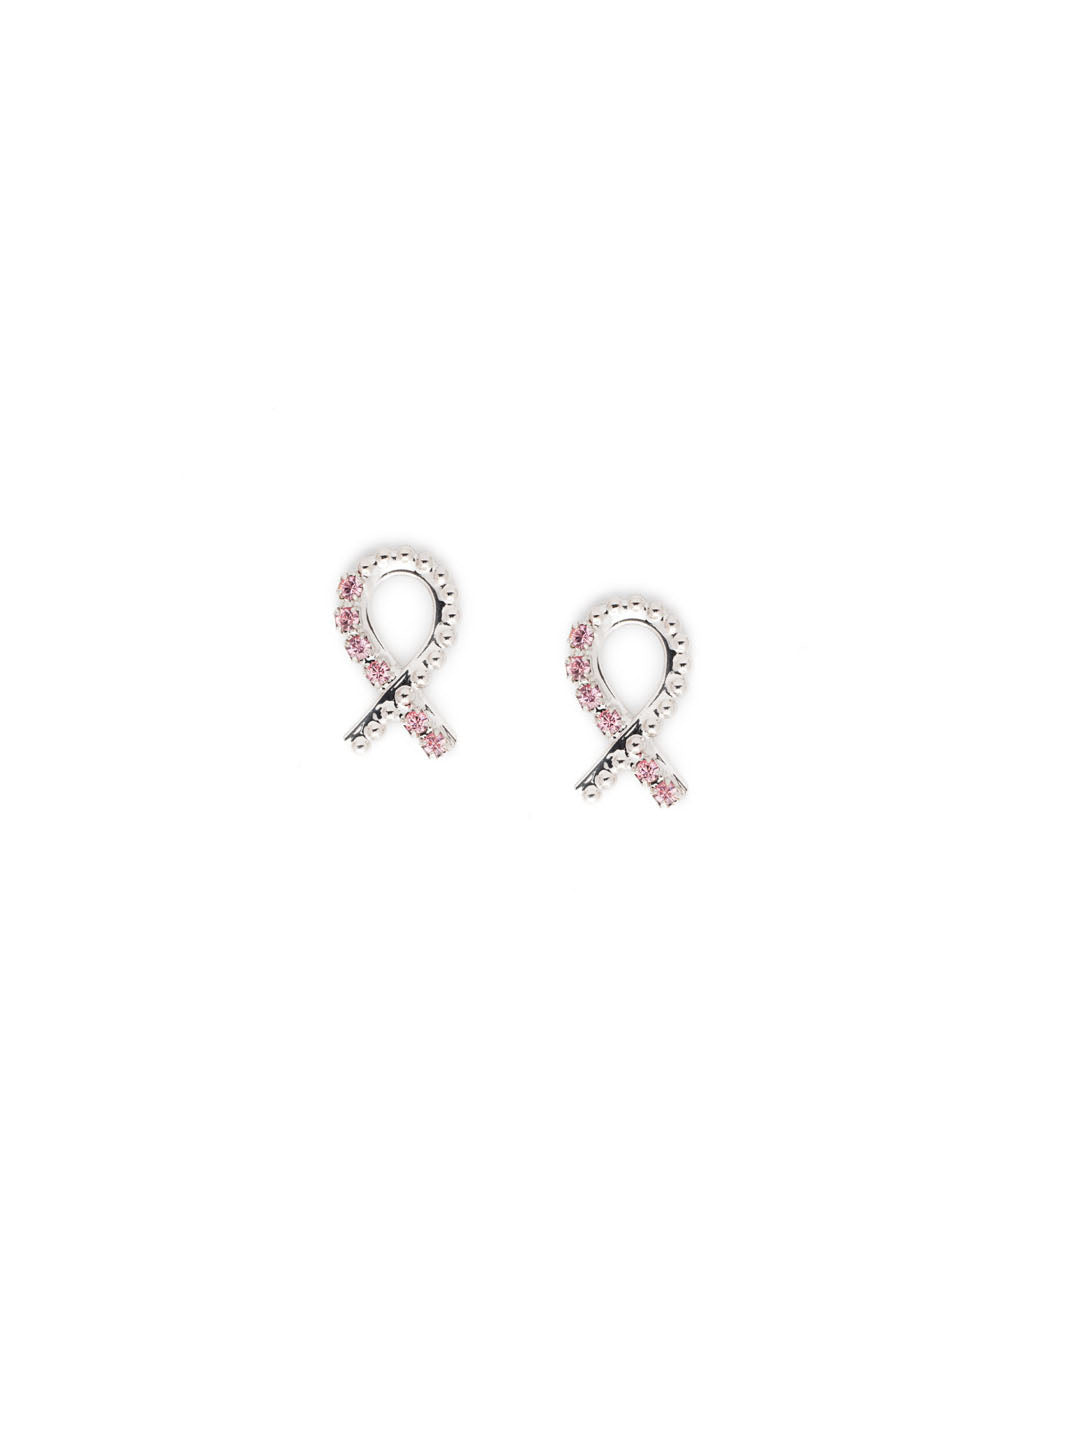 Crystal Ribbon Stud Earring - EEV201RHPNK - <p>The Crystal Ribbon Stud Earrings are created and inspired by the Breast Cancer Awareness ribbon and all the warriors who wear it. Delicate crystals line a metal ribbon, creating a meaningful statement. From Sorrelli's Petal Pink collection in our Palladium Silver-tone finish.</p>